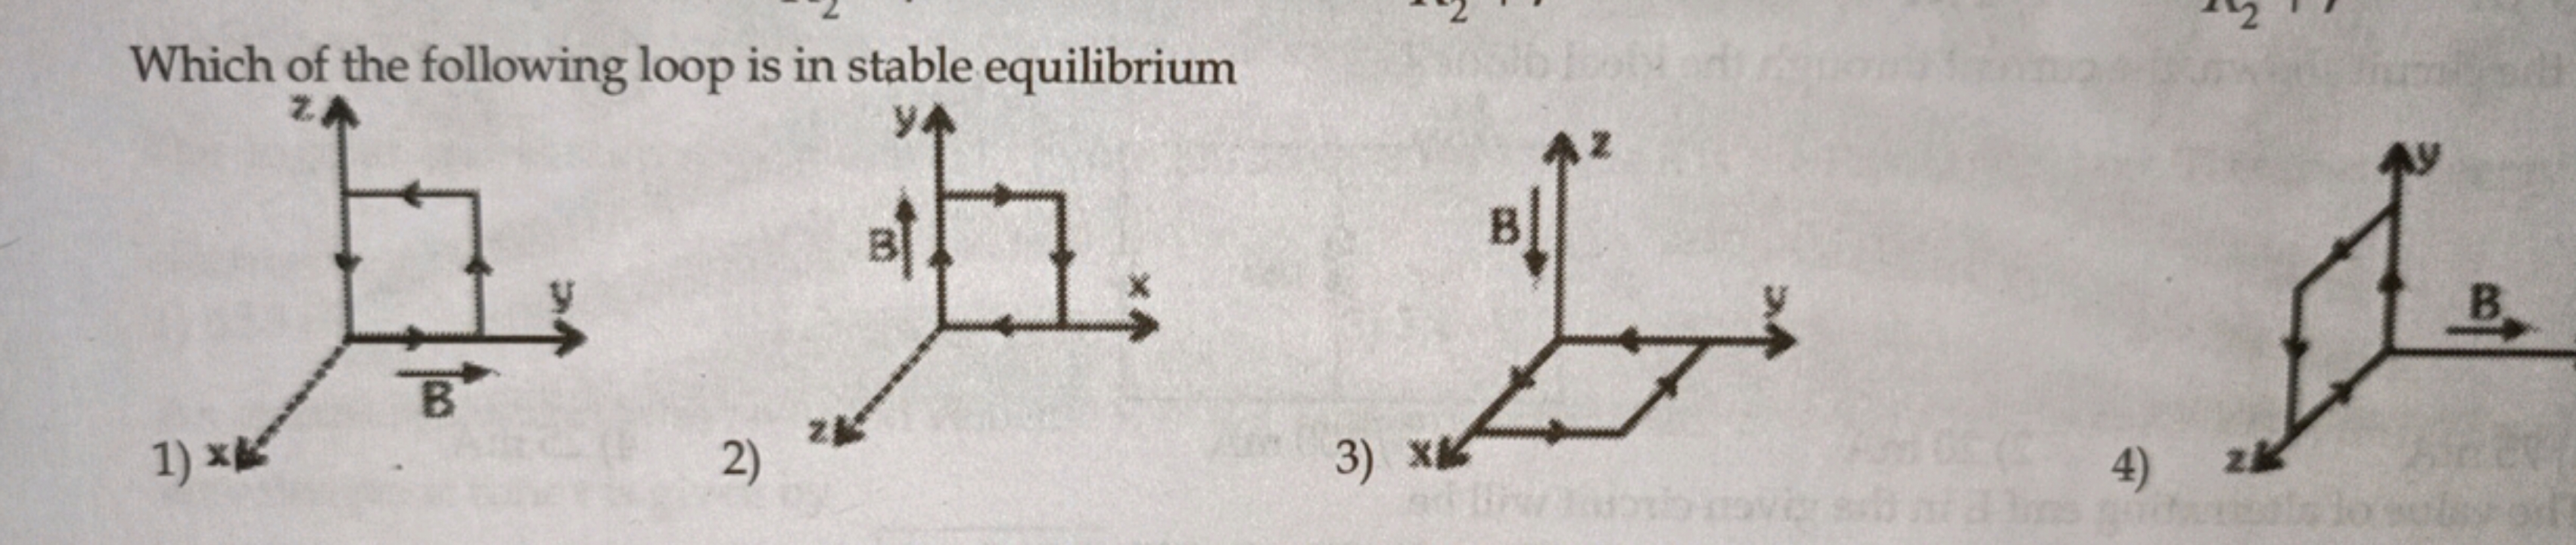 Which of the following loop is in stable equilibrium
2)
3)
4) 2i
